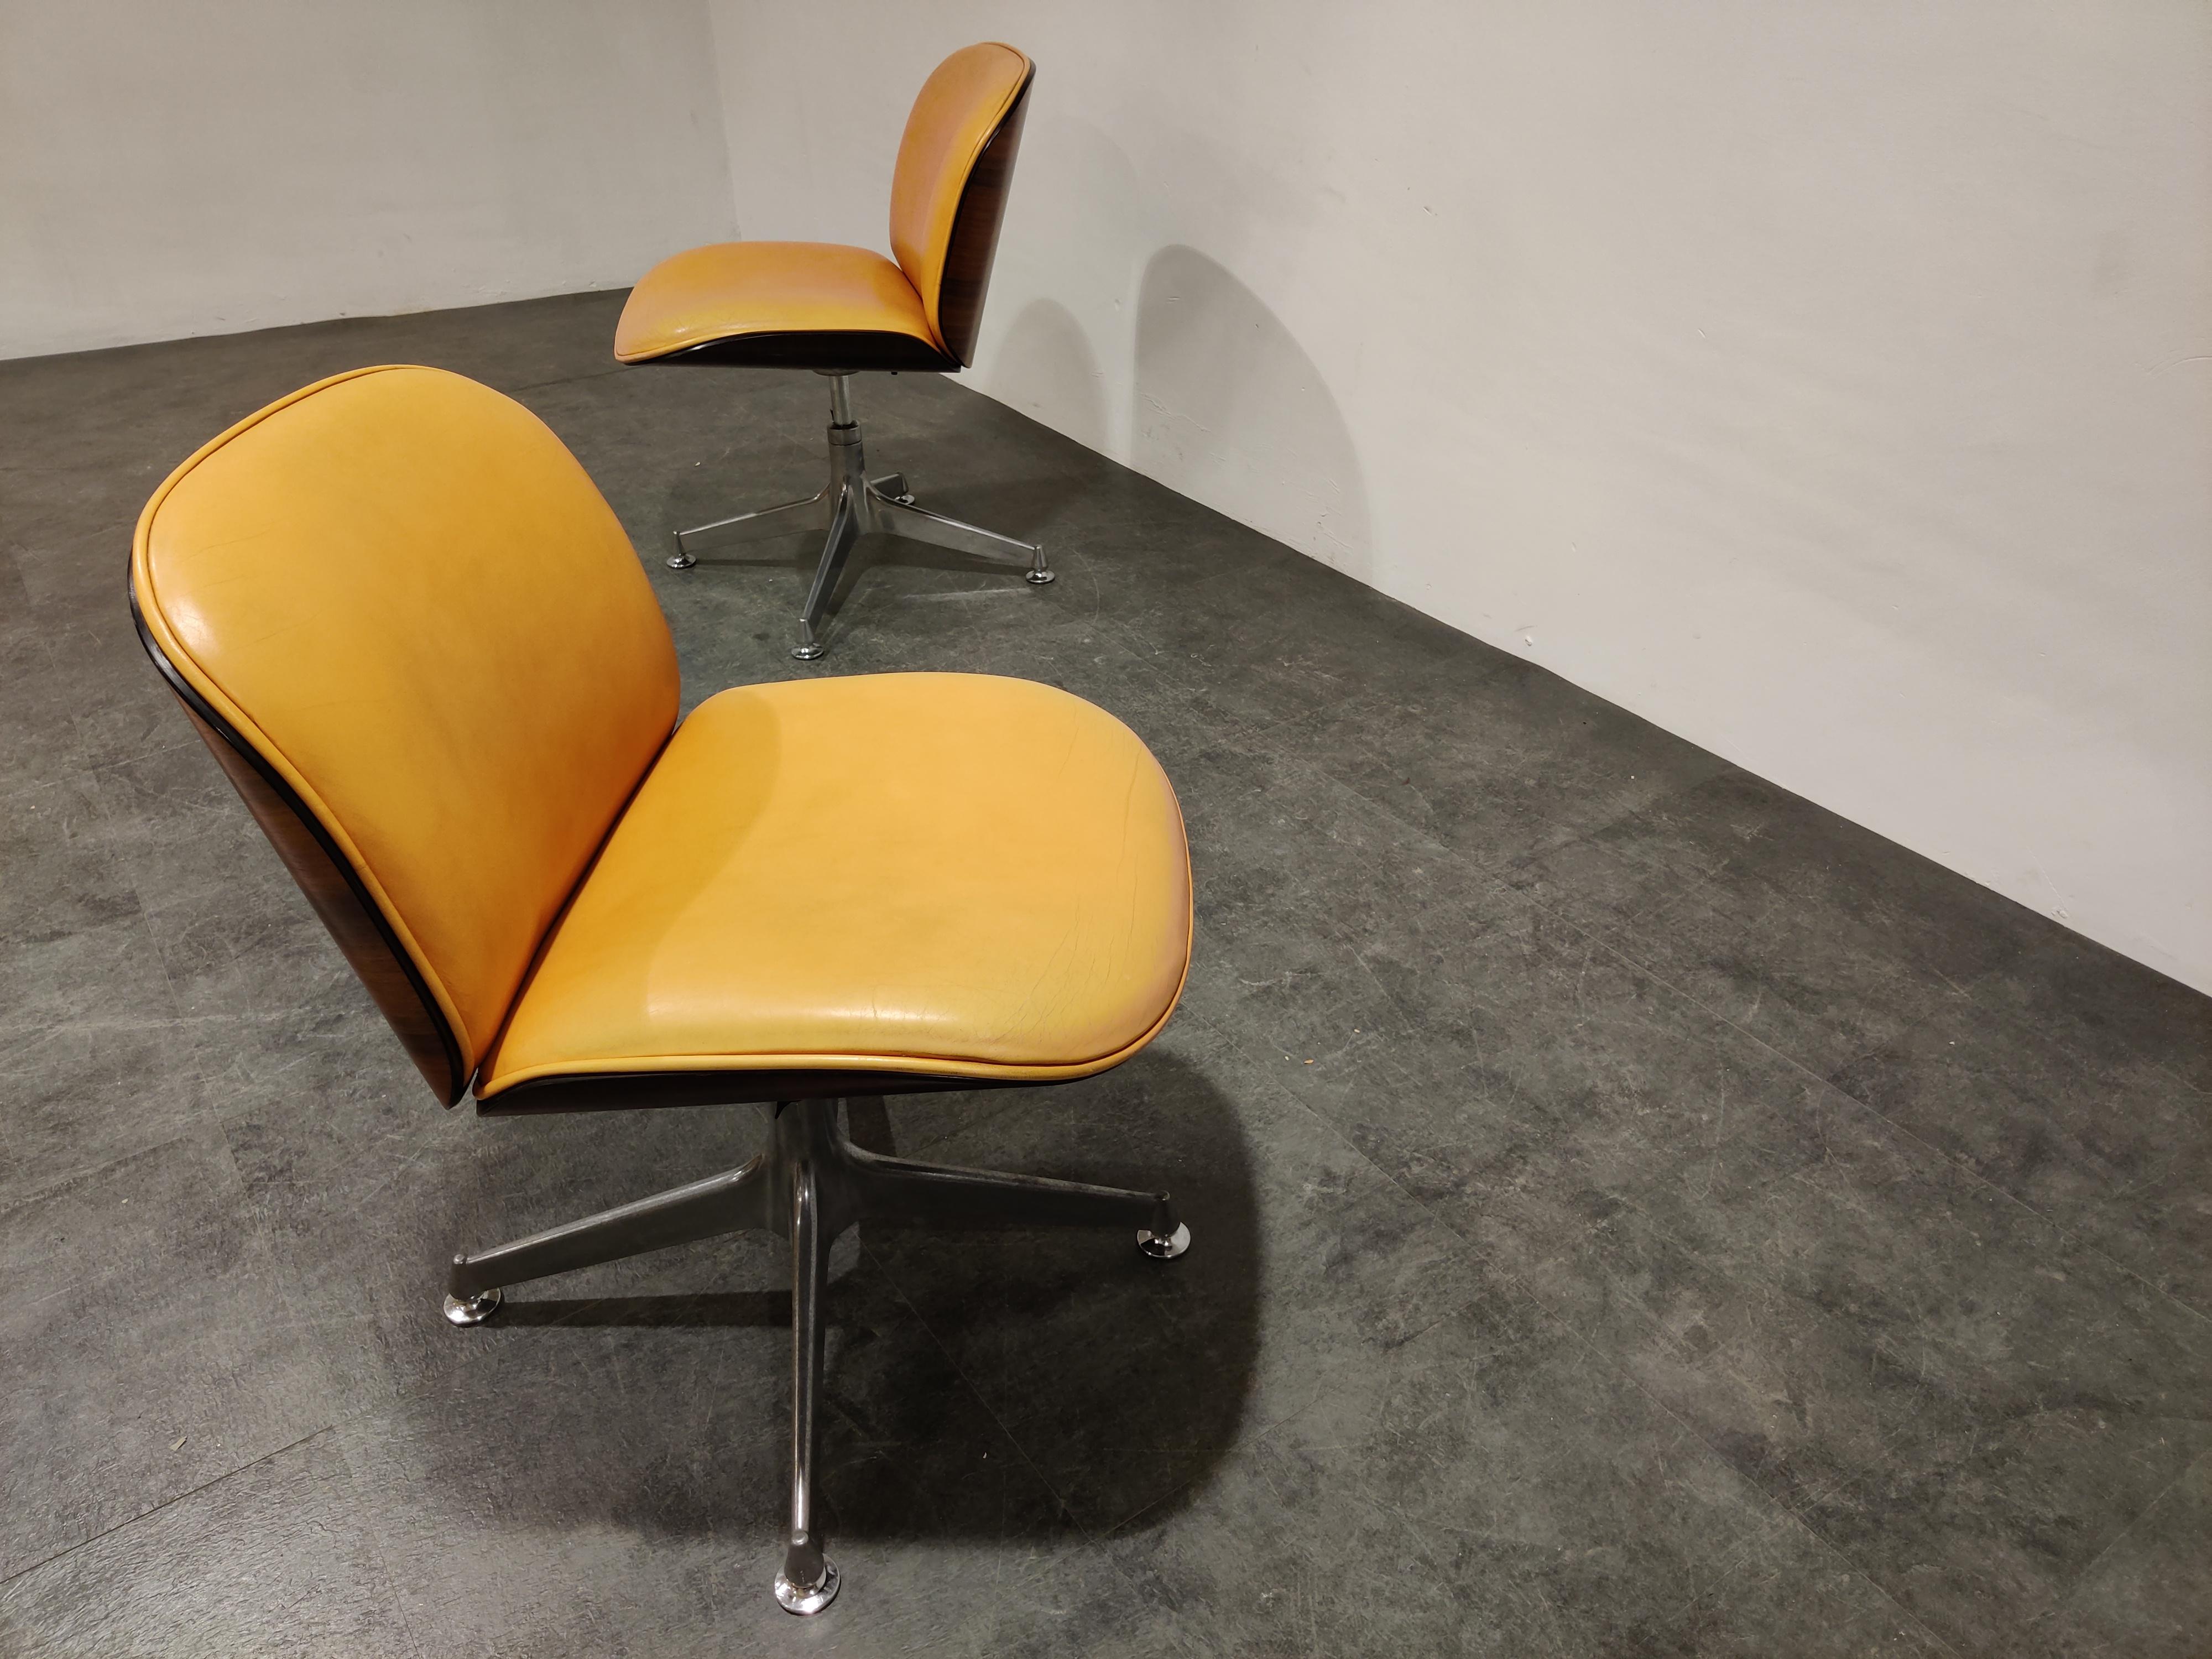 Midcentury rosewood swivel/desk chairs by Ico Parisi for MIM Roma. (Mobili Italiani Moderni)

They come in their original salmon color leather upholstery with a beautiful wear.

Aluminum star shaped base.

Good condition.

All labeled with